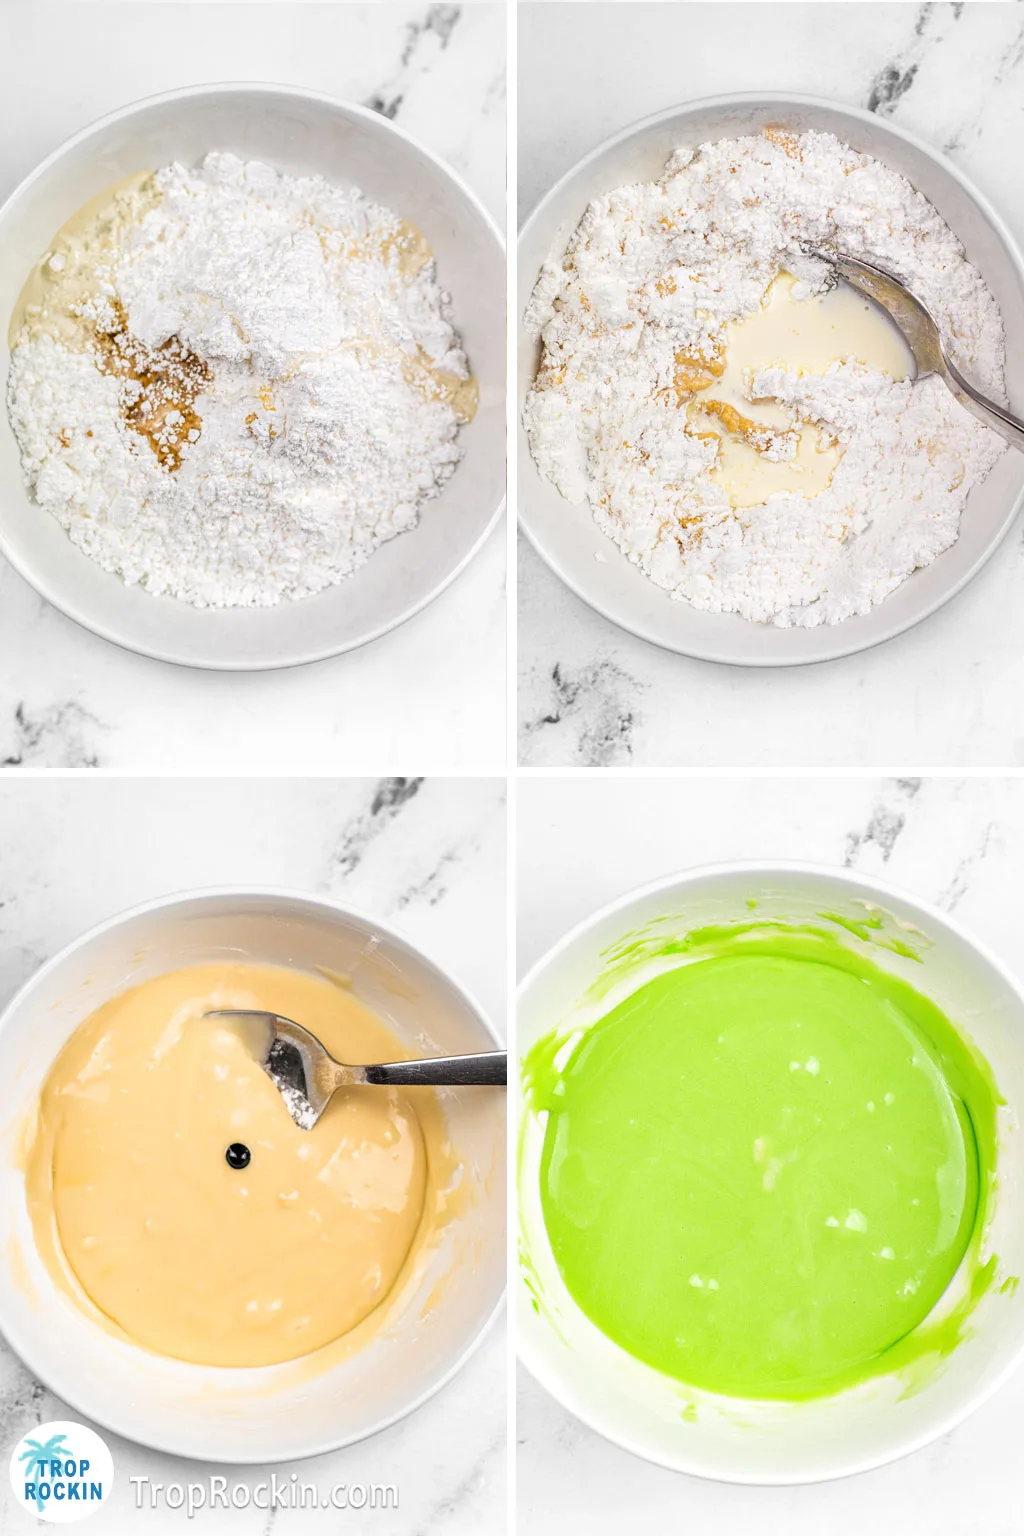 Four photo collage. Top left is all ingredients (minus good coloring) in a bowl. Top right is the beginning of mixing the ingredients with a spoon. Bottom left is fully mixed with 3 drops of food coloring. Bottom right is mixed together and is now a green filling.